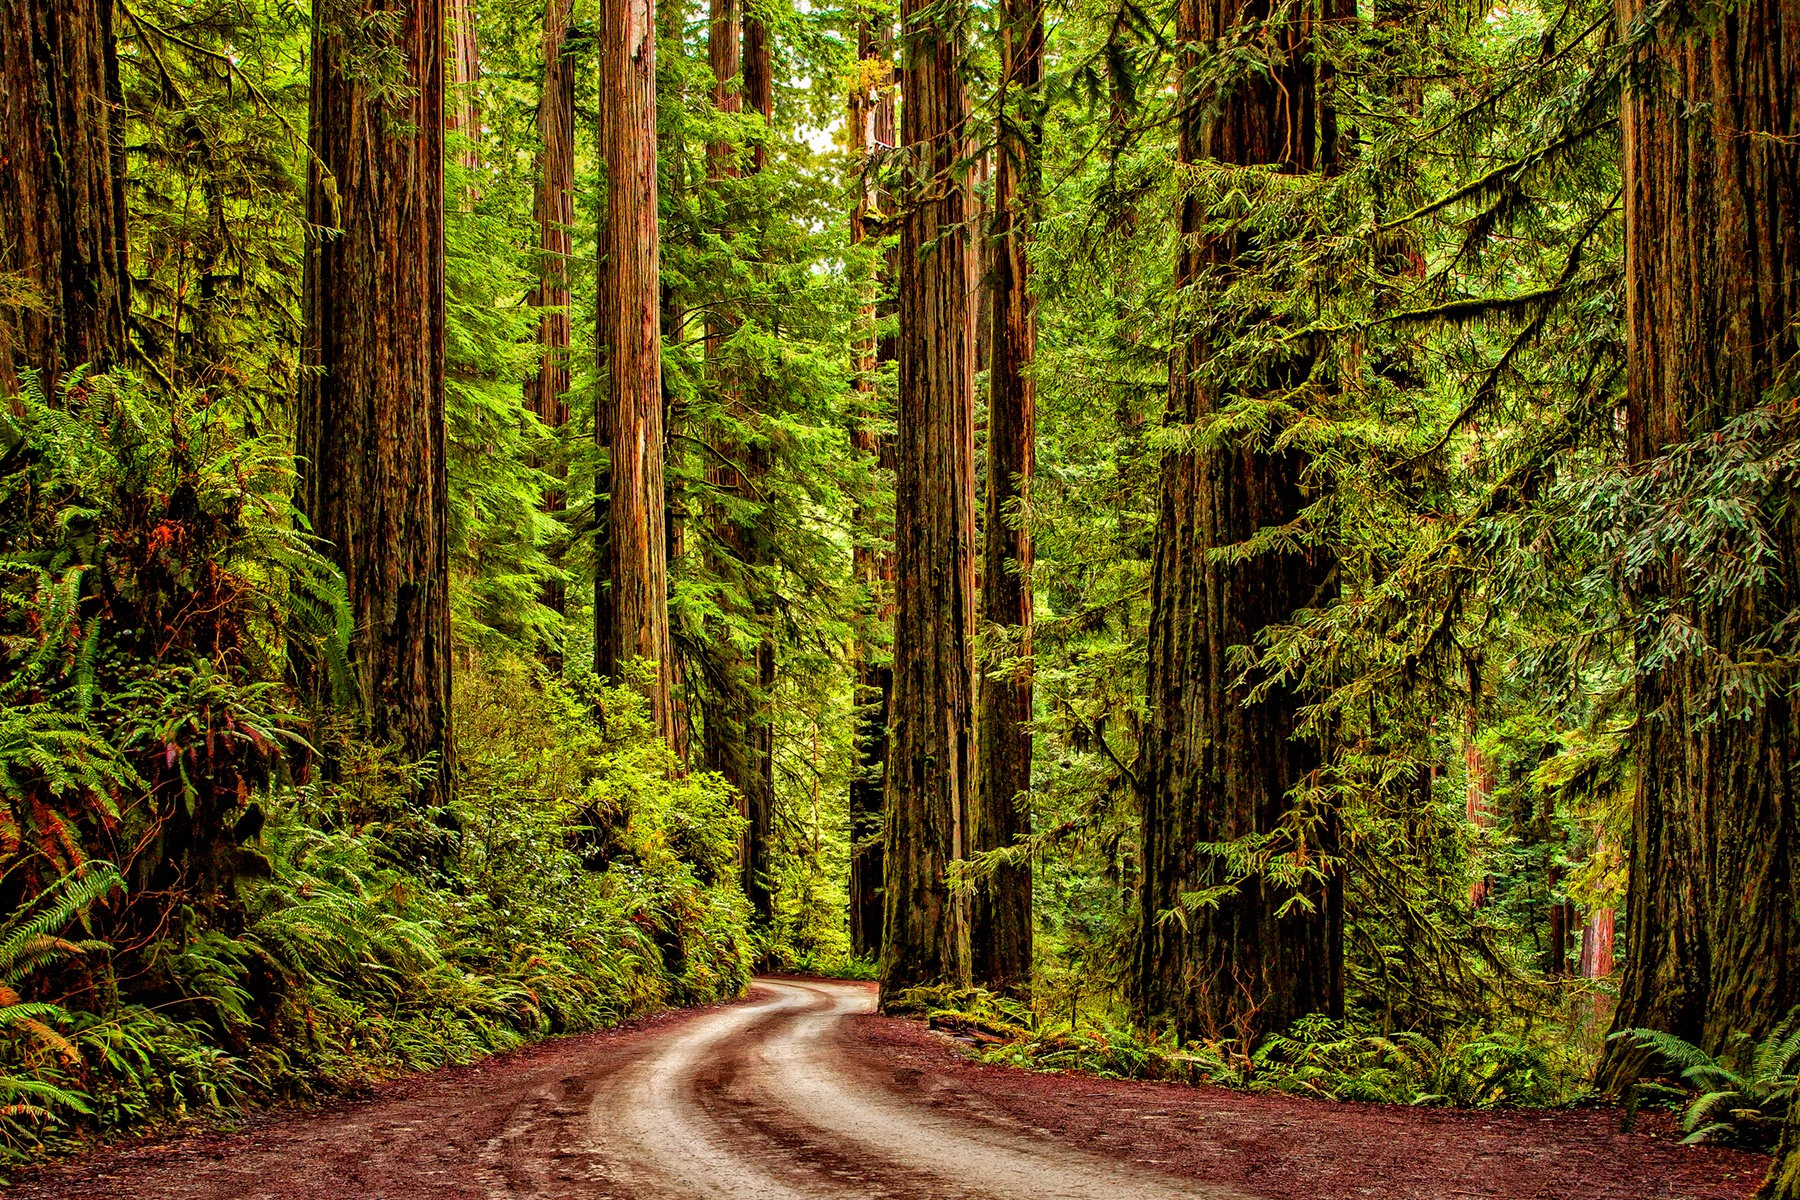 REDWOOD ROAD - This unbelievable drive winds for several miles across the forest floor of Jedediah Smith Redwood State Park in northern California. If you need a reason to travel to California, this is it.